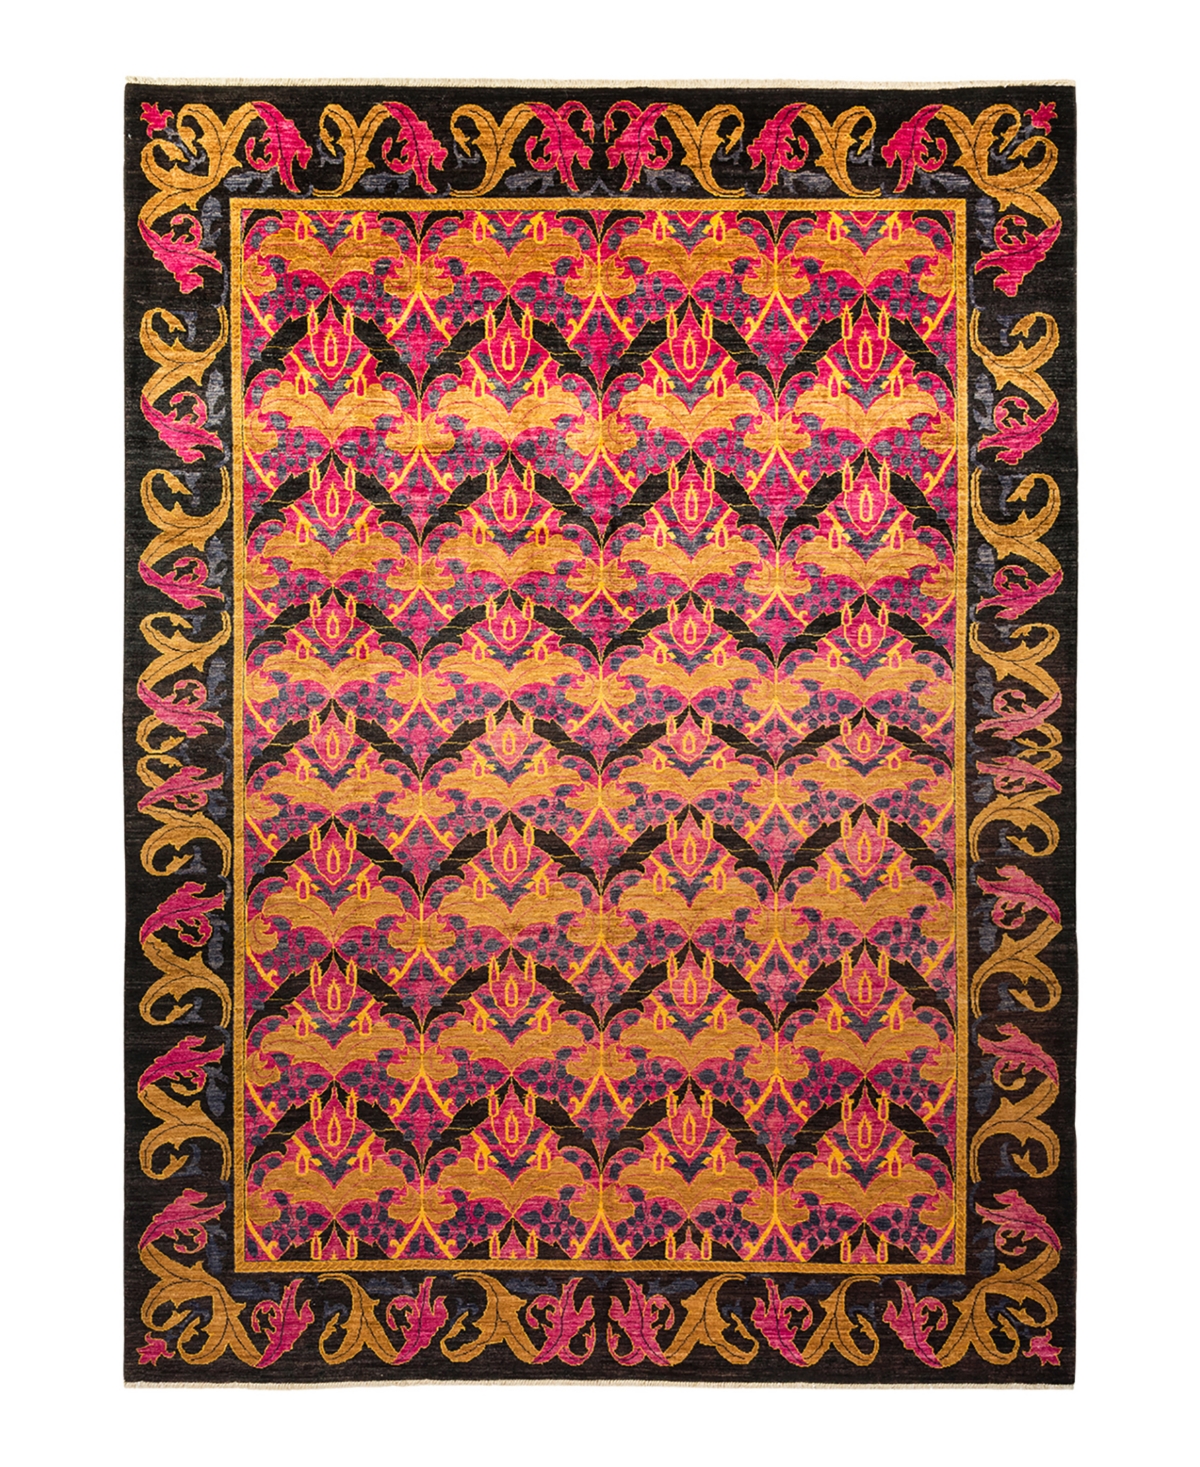 Adorn Hand Woven Rugs Arts and Crafts M1641 9'1in x 12'4in Area Rug - Black